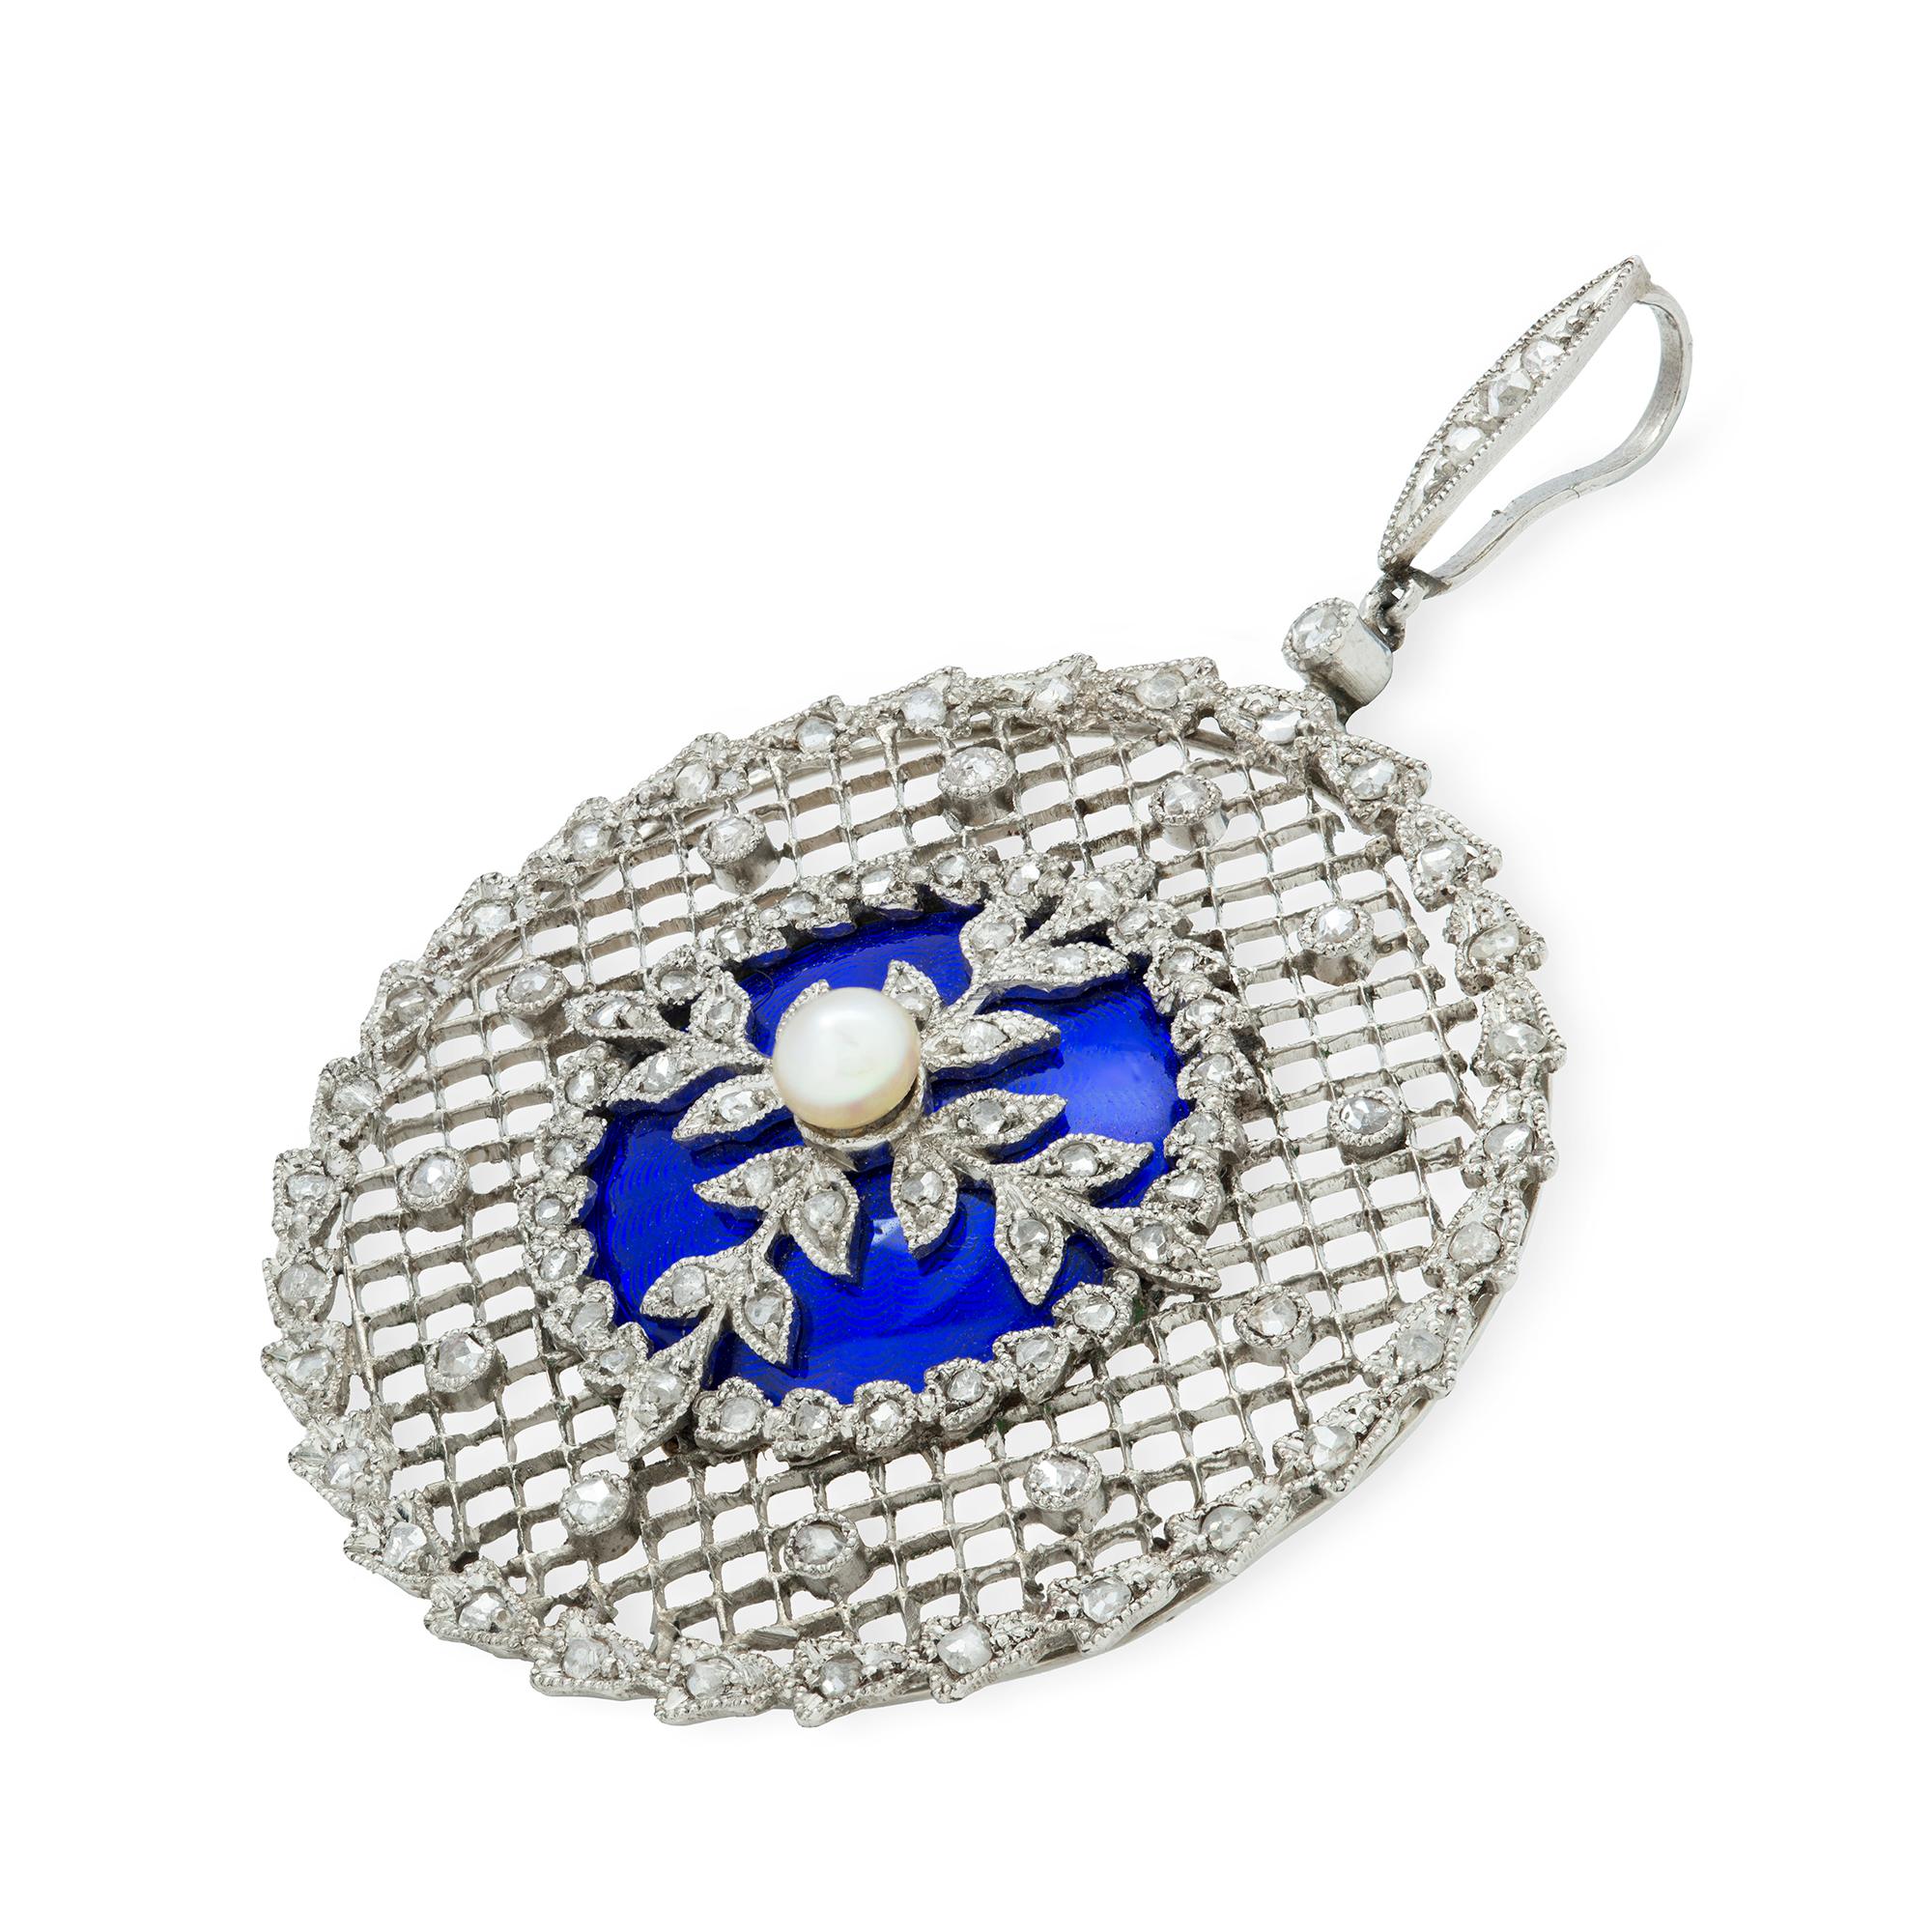 An Edwardian diamond, pearl and enamel pendant, the centre a pearl sitting on four branches of diamond-set leaves all set on blue enamel framed by a circular border of diamonds, surrounded by an openwork grid design set with diamonds to a